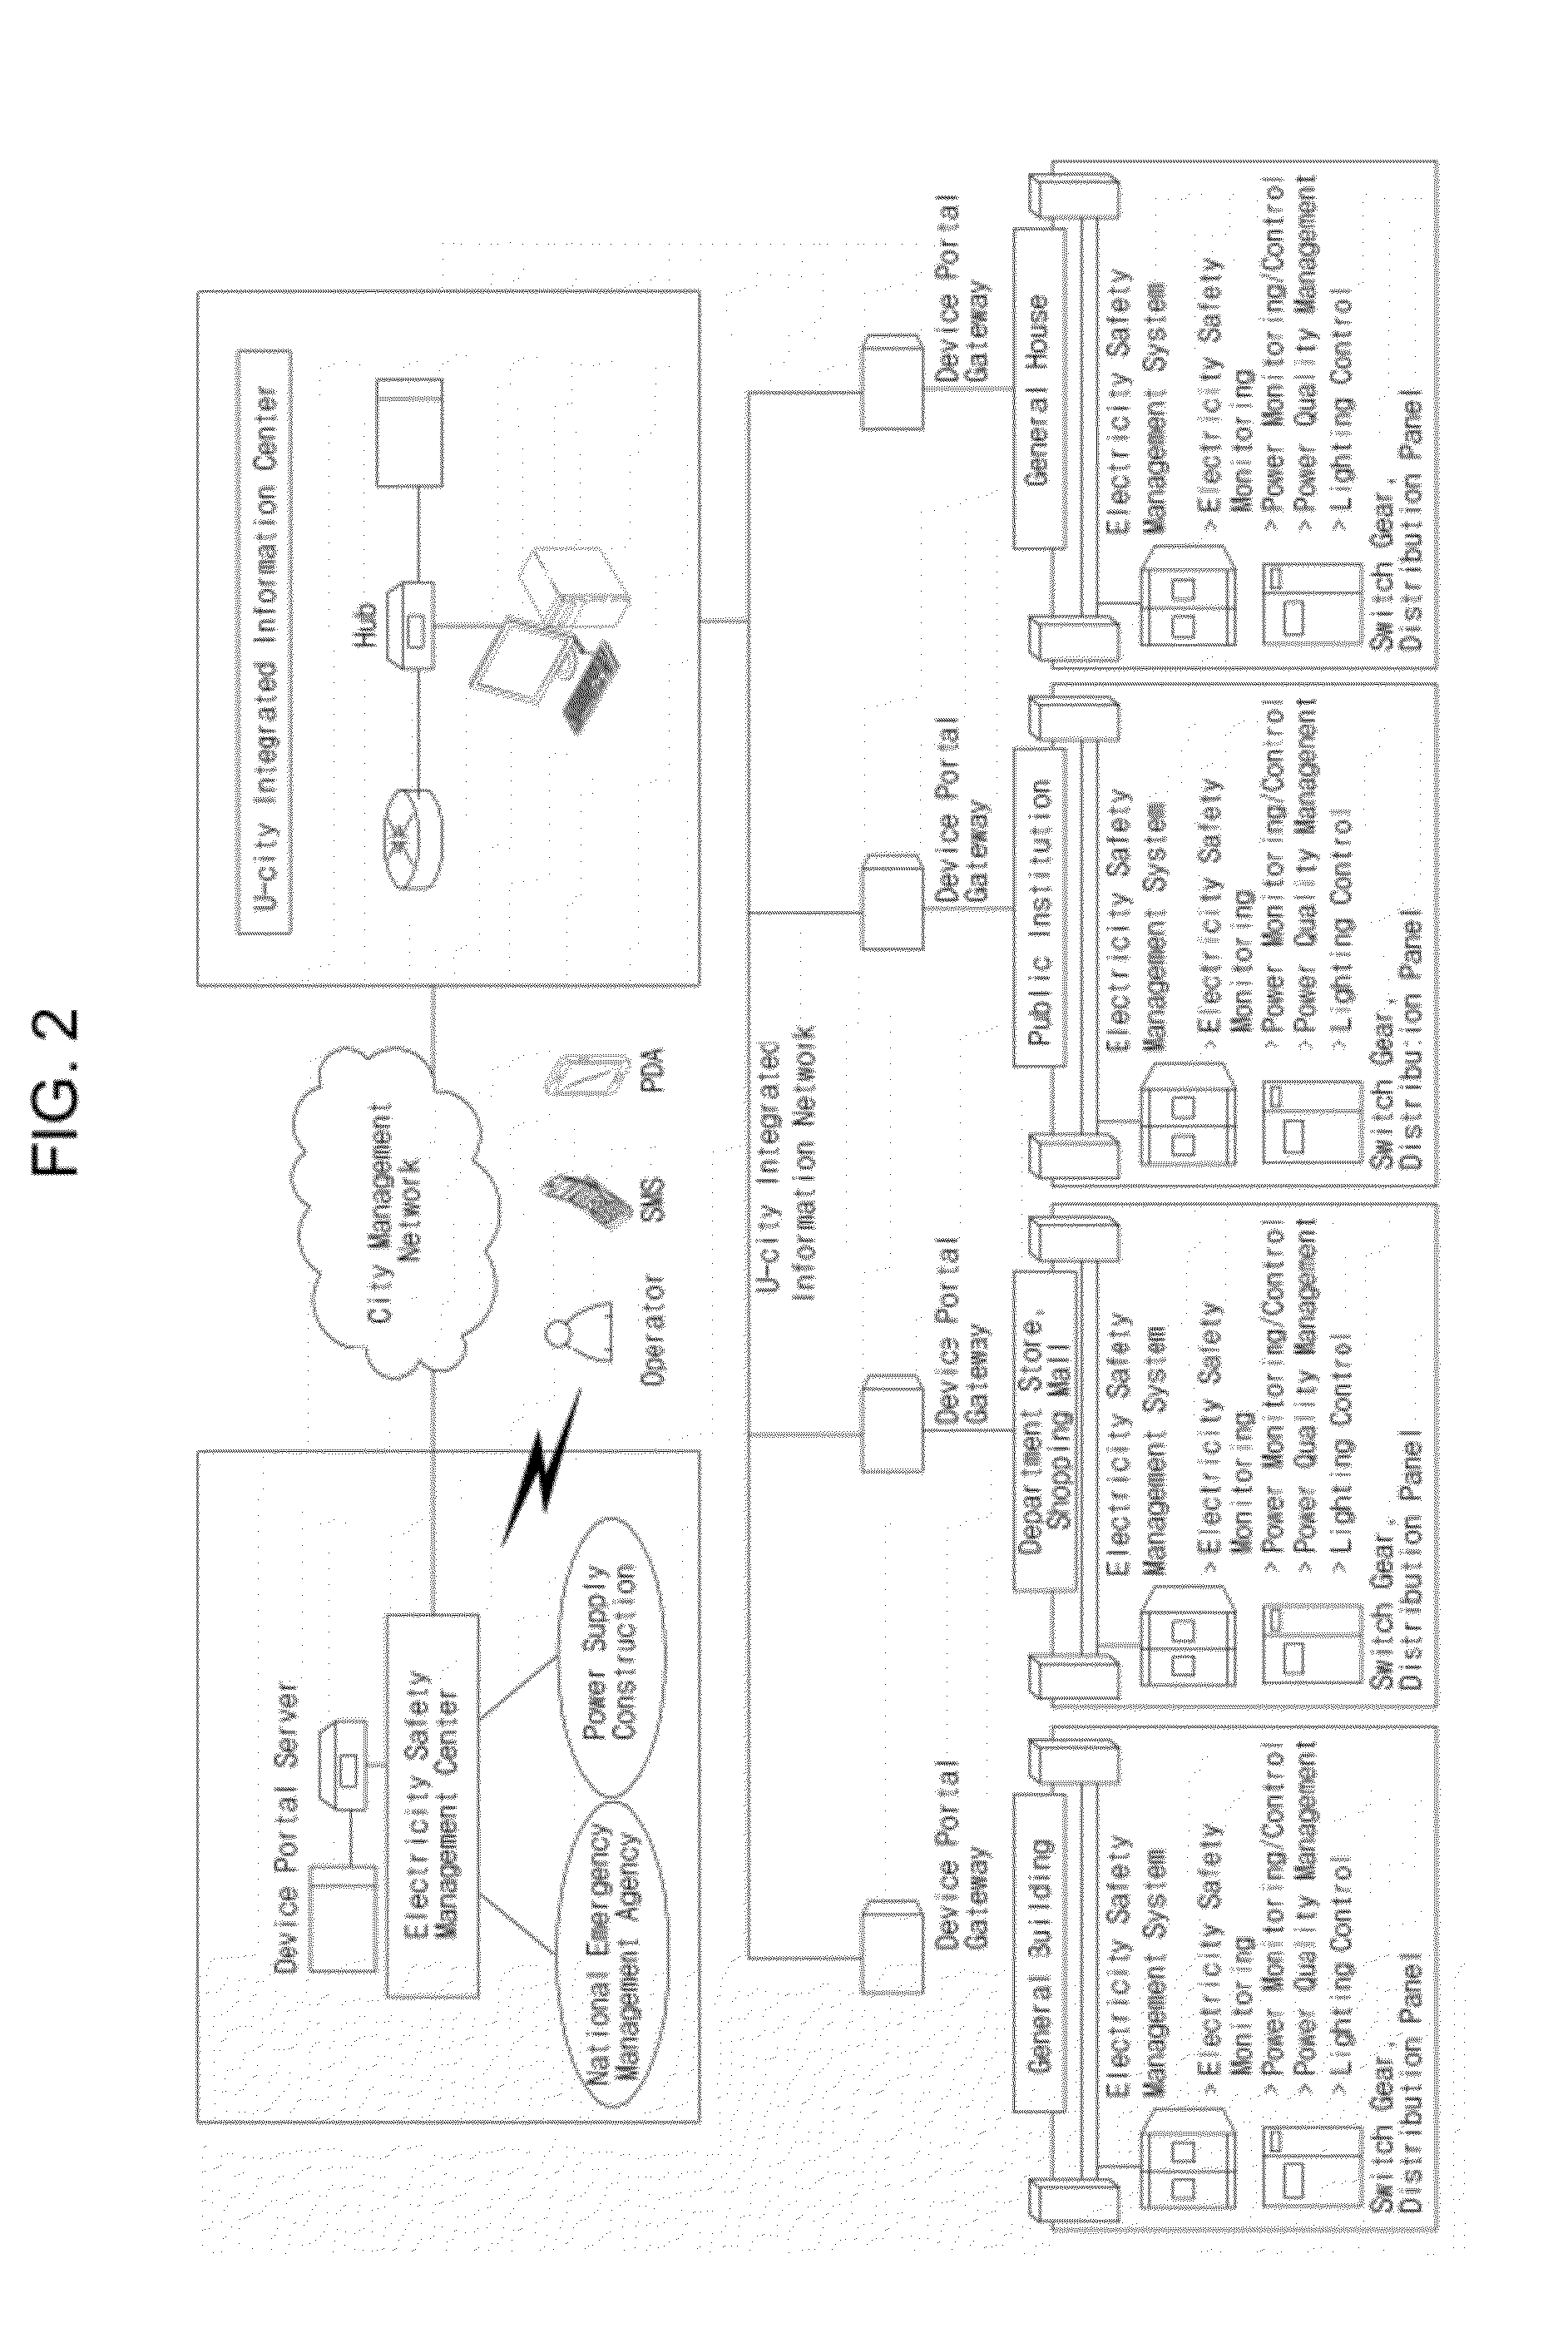 Remote electrical safety diagnosis system and apparatus